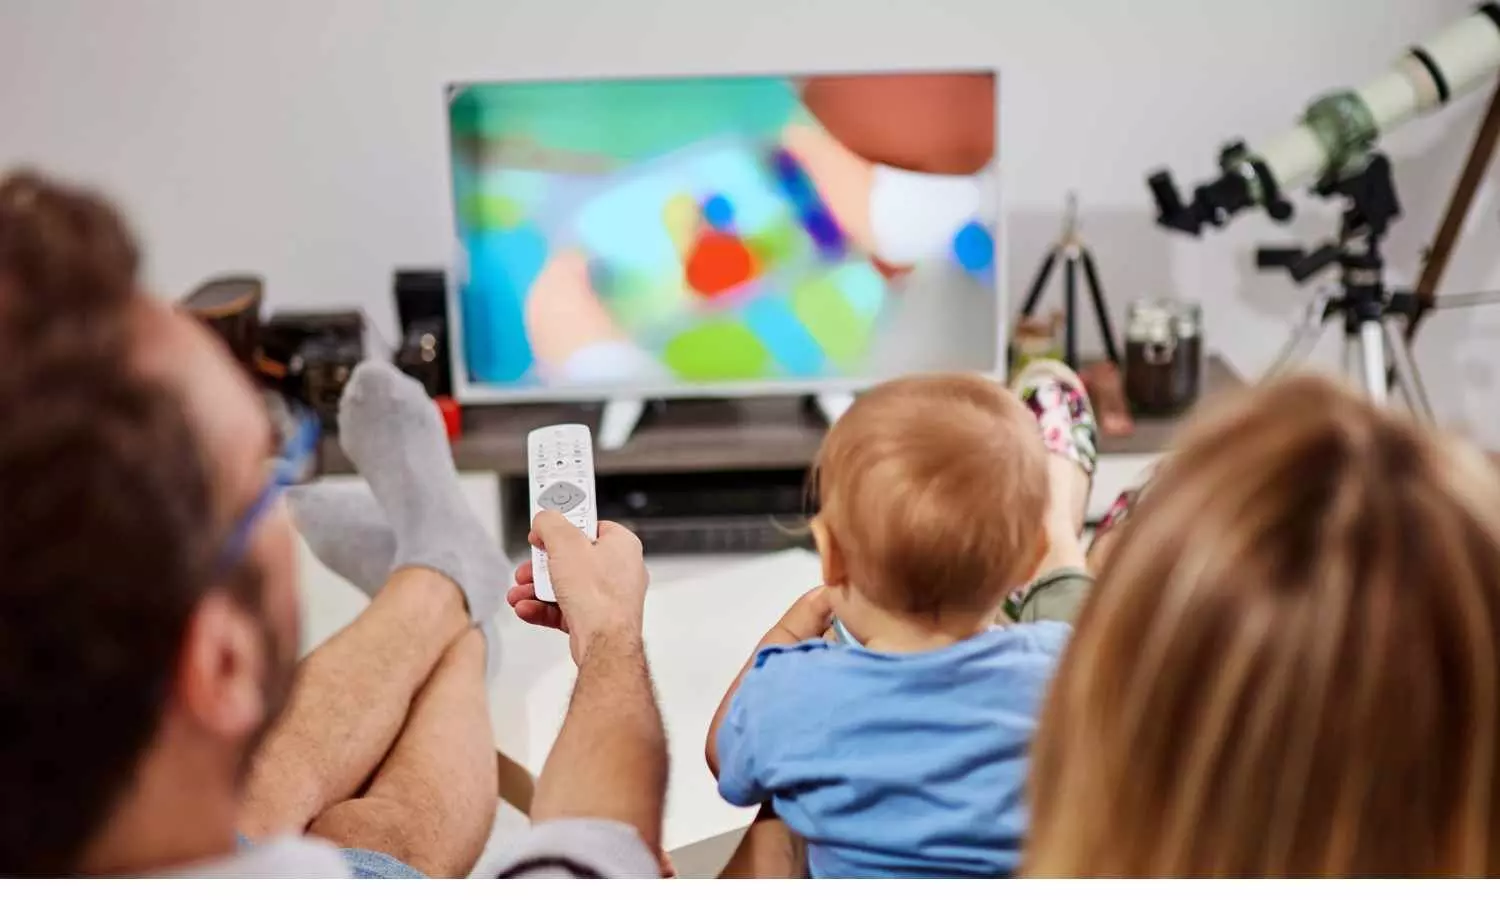 Exposing toddlers to lot of  TV might hurt their ability to process the world, a new study